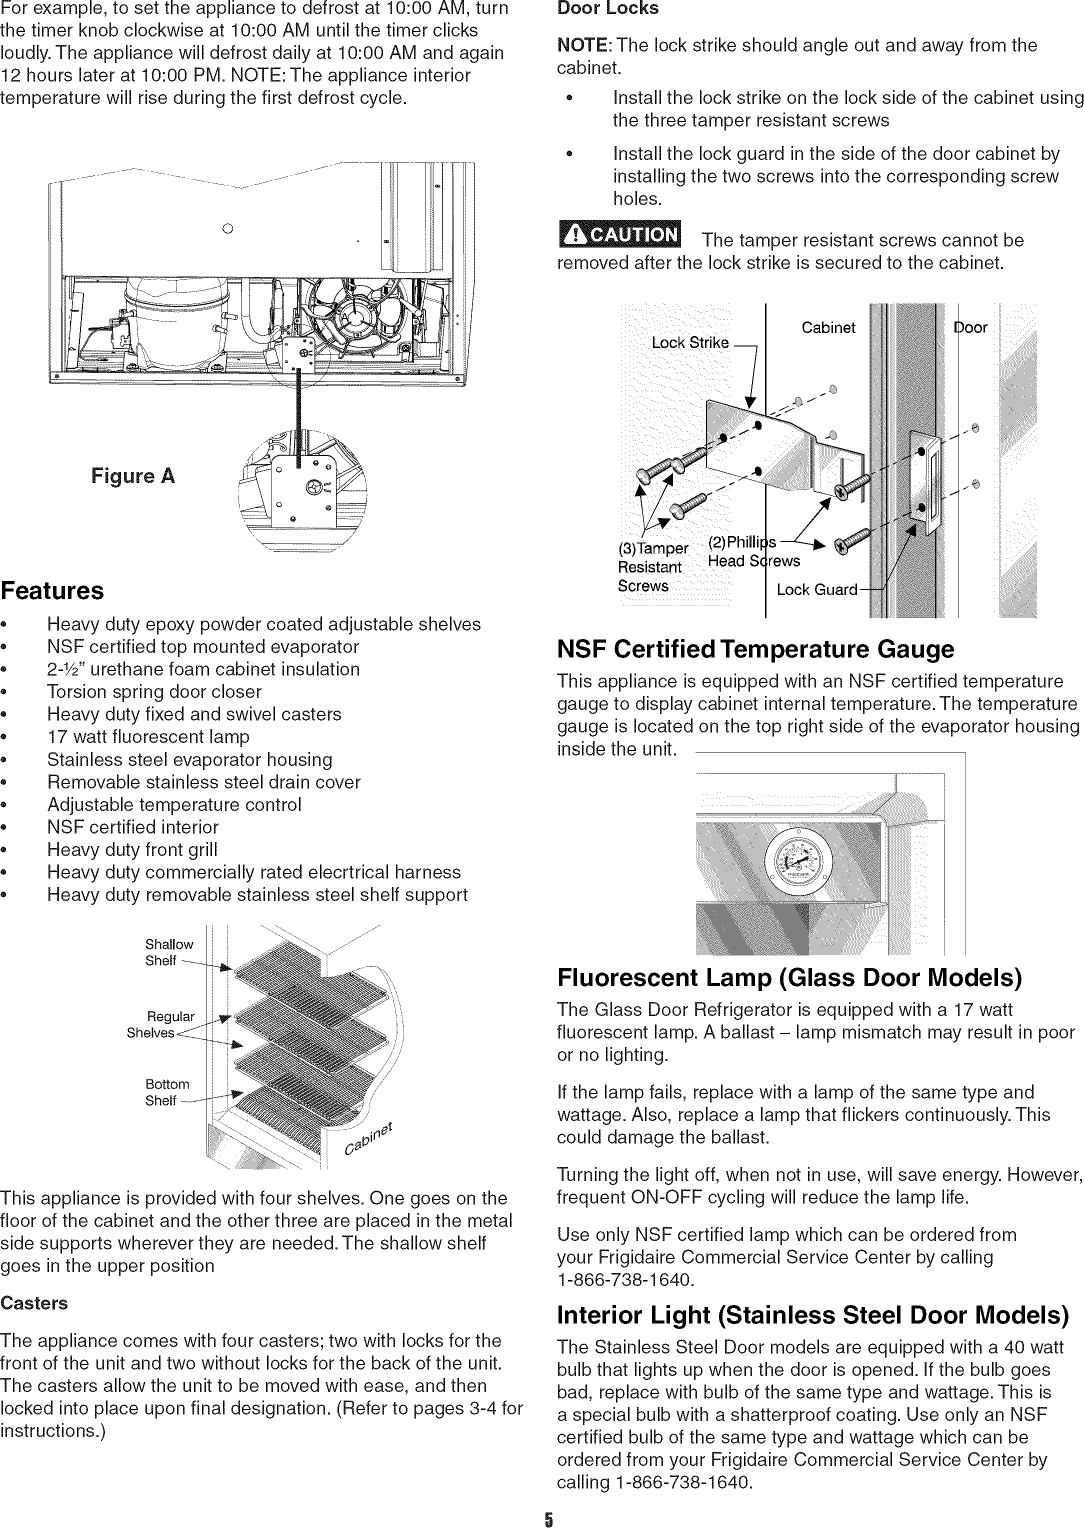 Page 5 of 9 - Kelvinator KFS220RHY1 User Manual  FREEZER - Manuals And Guides 1006066L